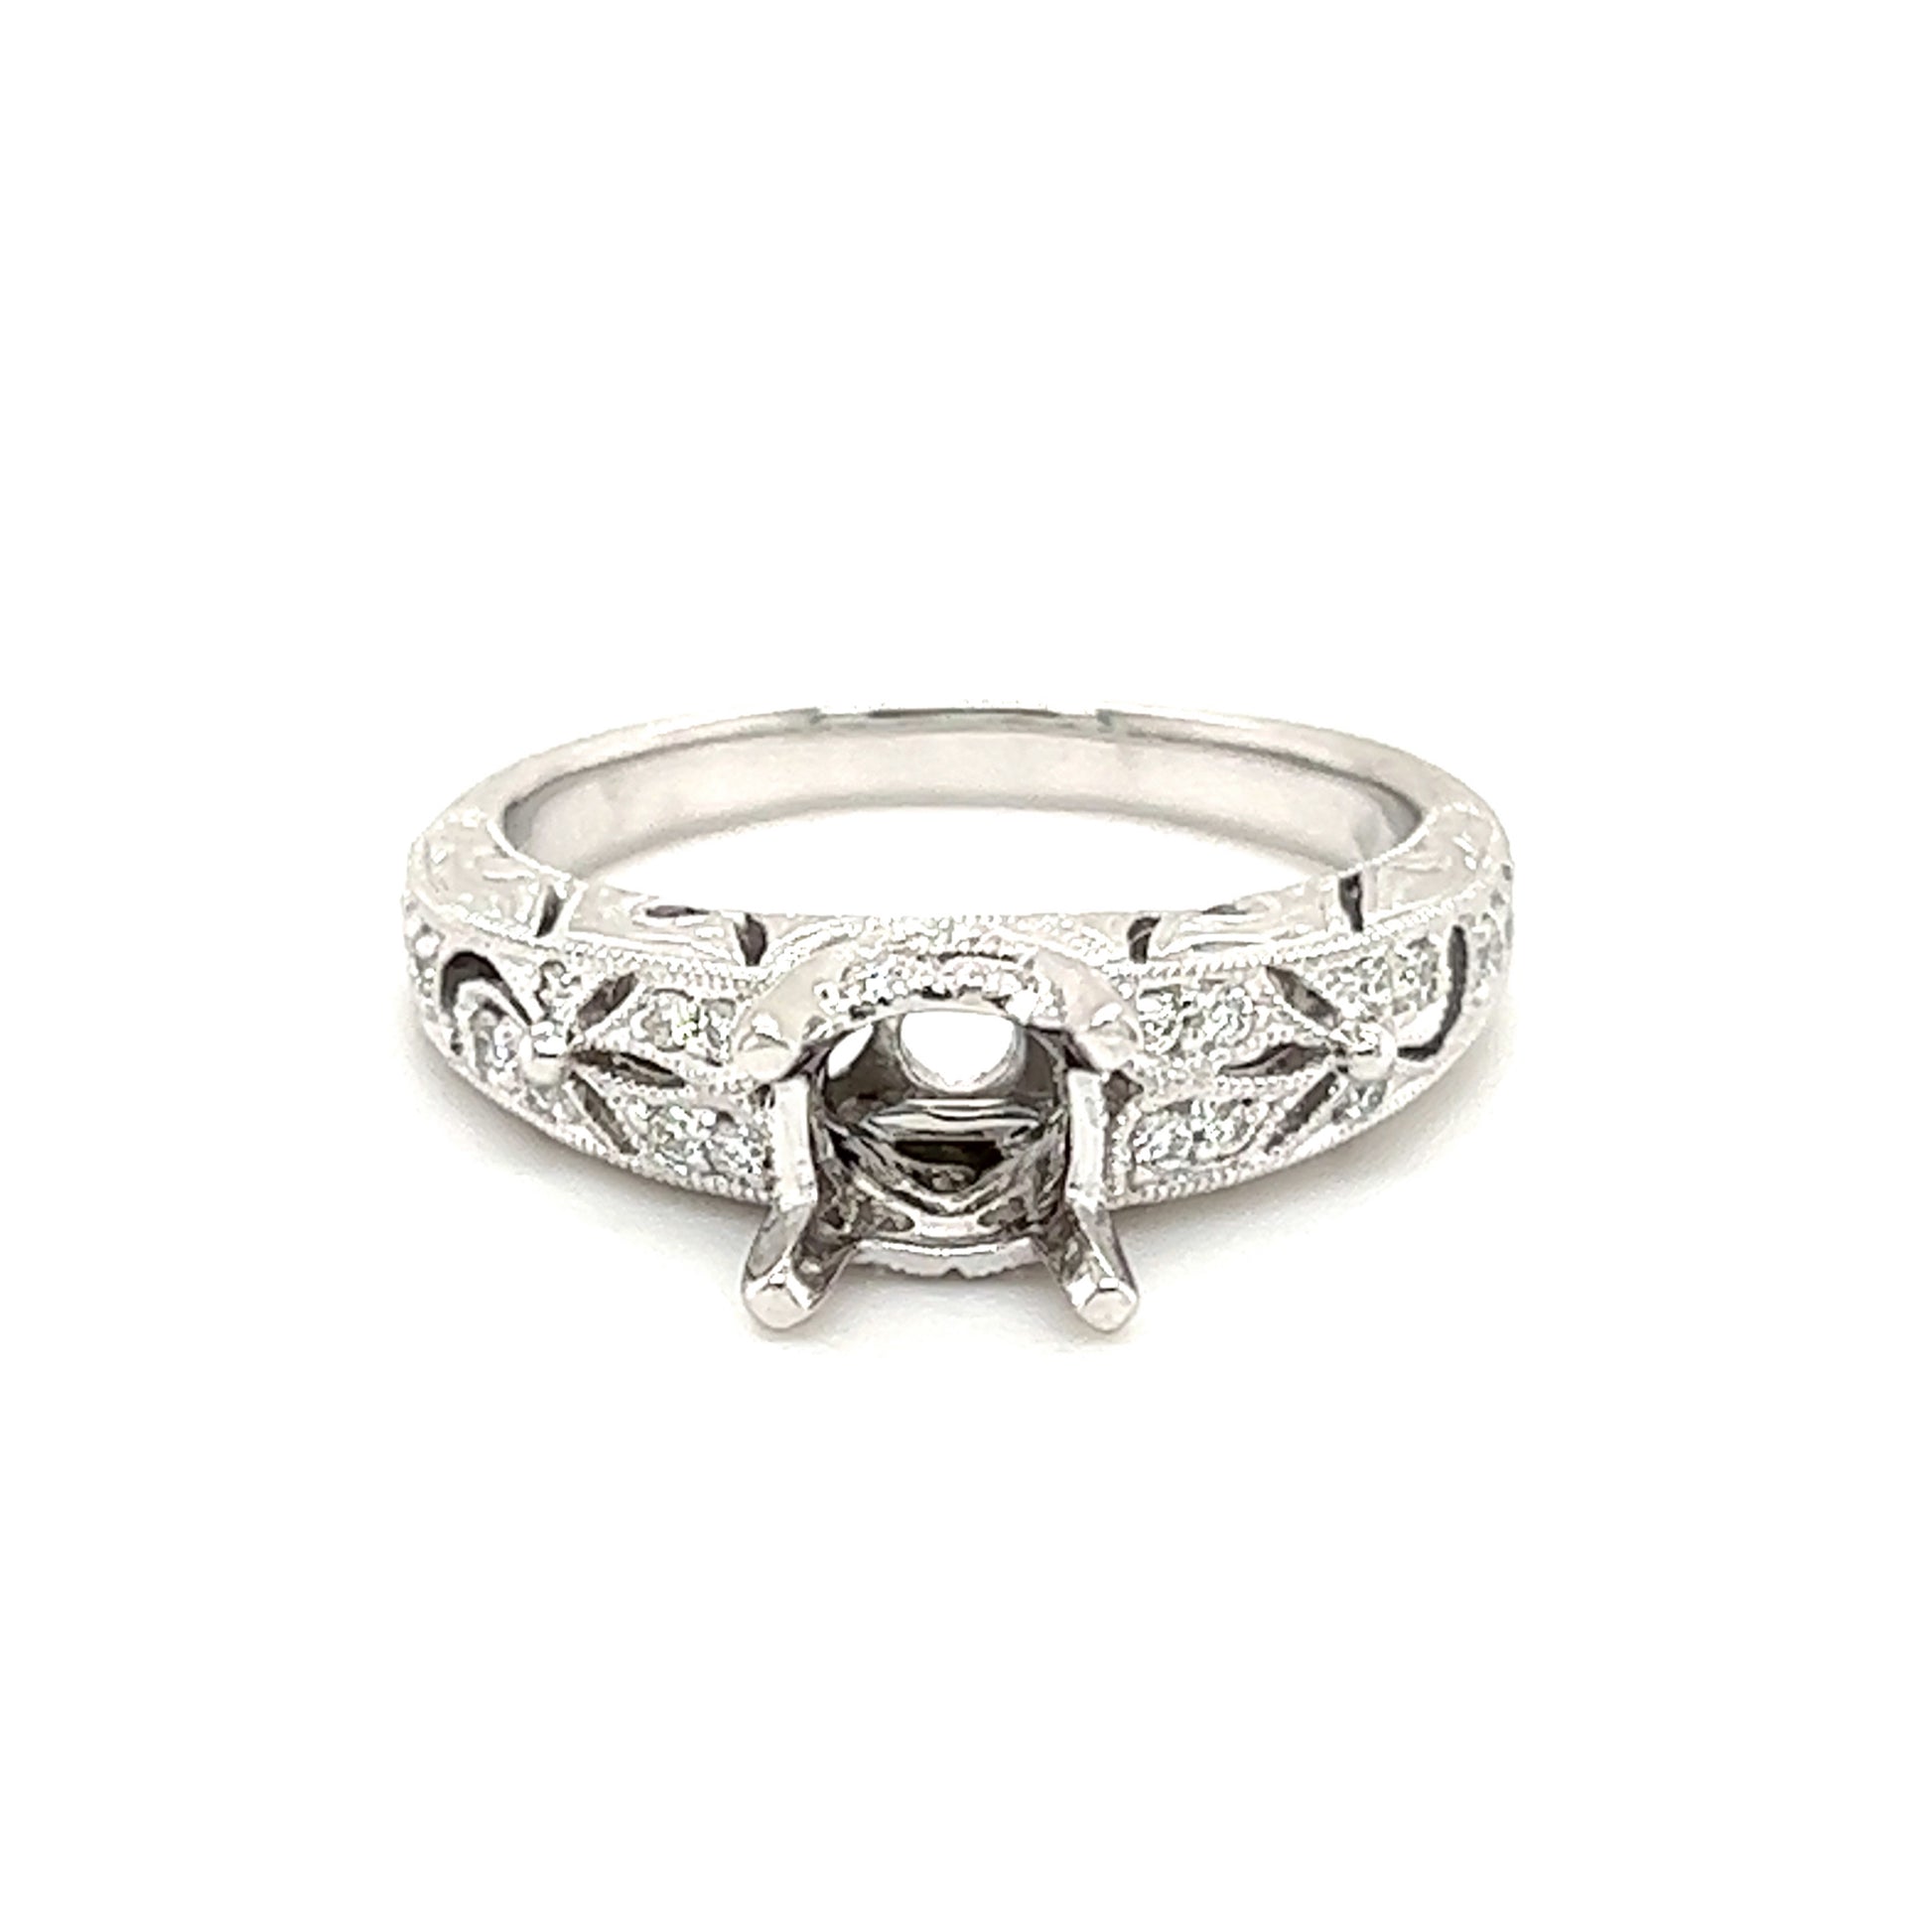 Filigree Engraved Diamond Ring Setting with Twenty-Eight in 14K White Gold Front View